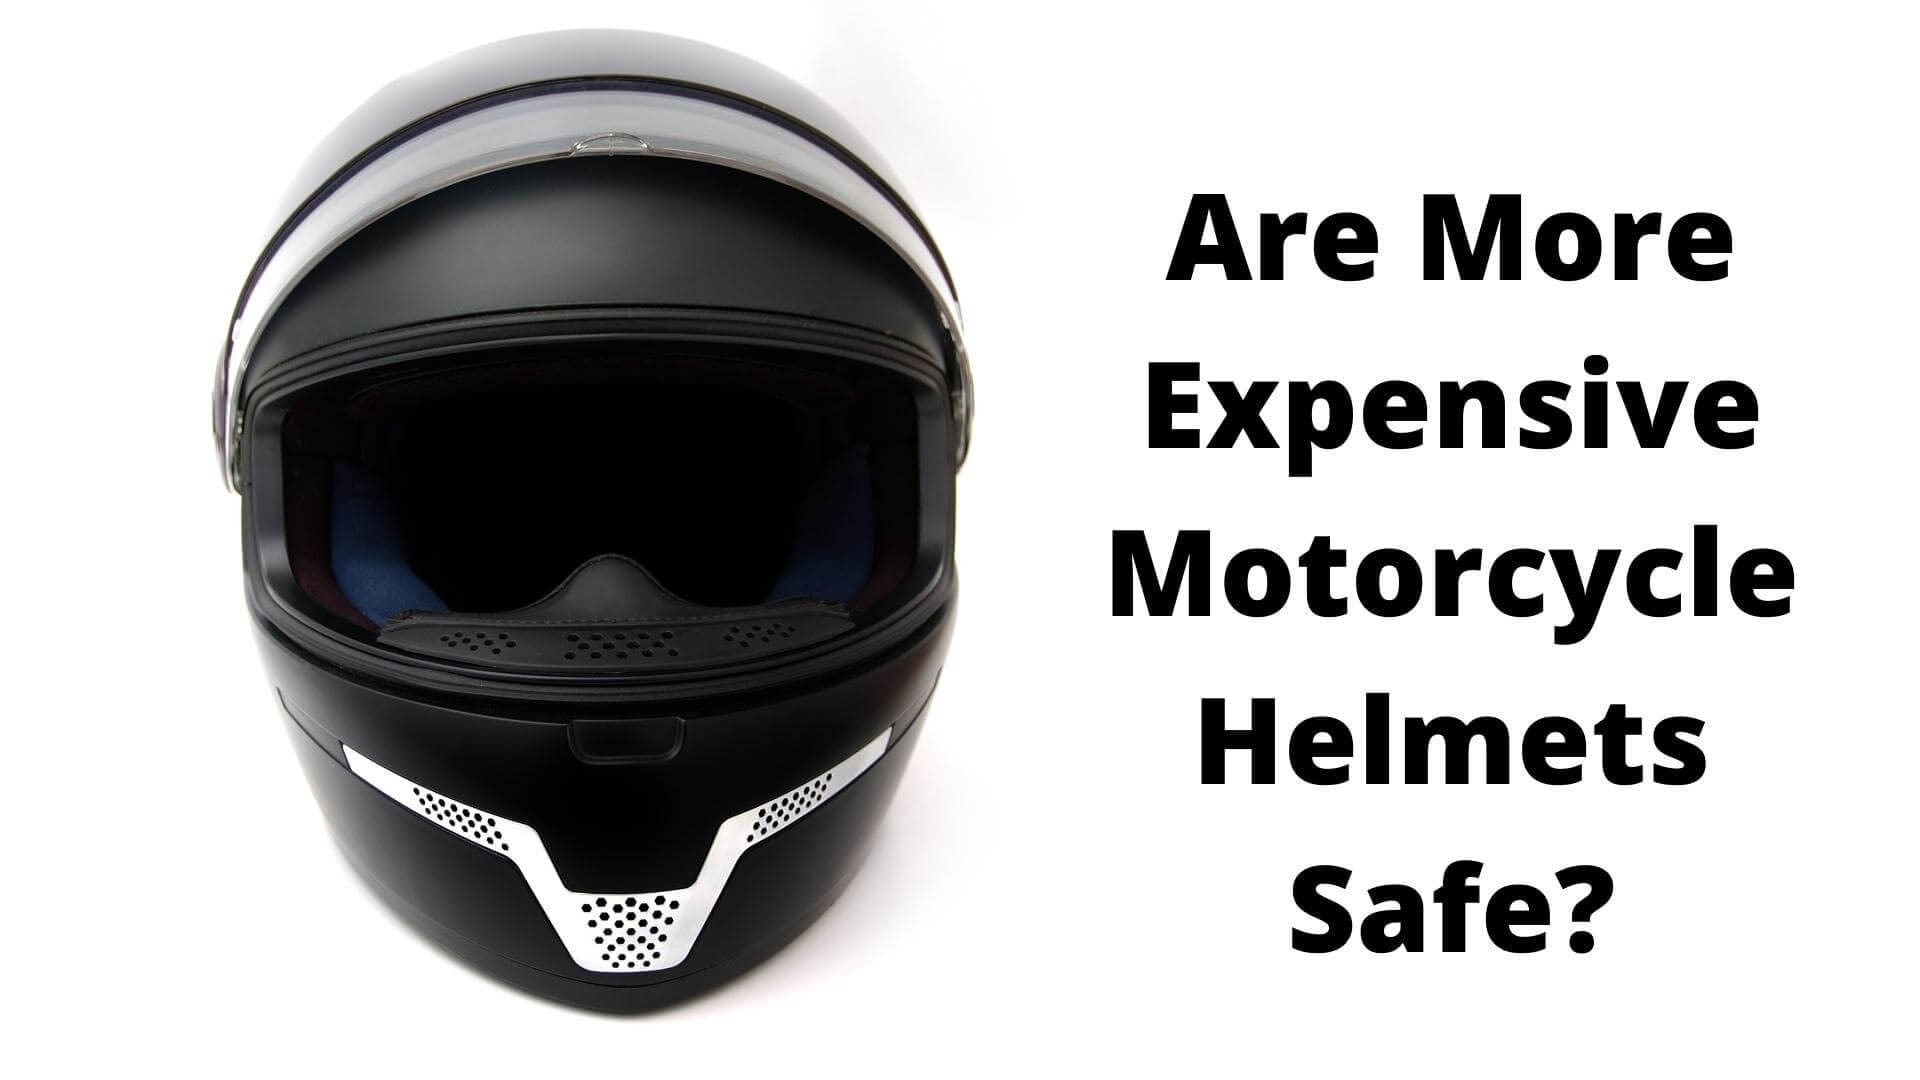 Are More Expensive Motorcycle Helmets Safe? Detailed Explained